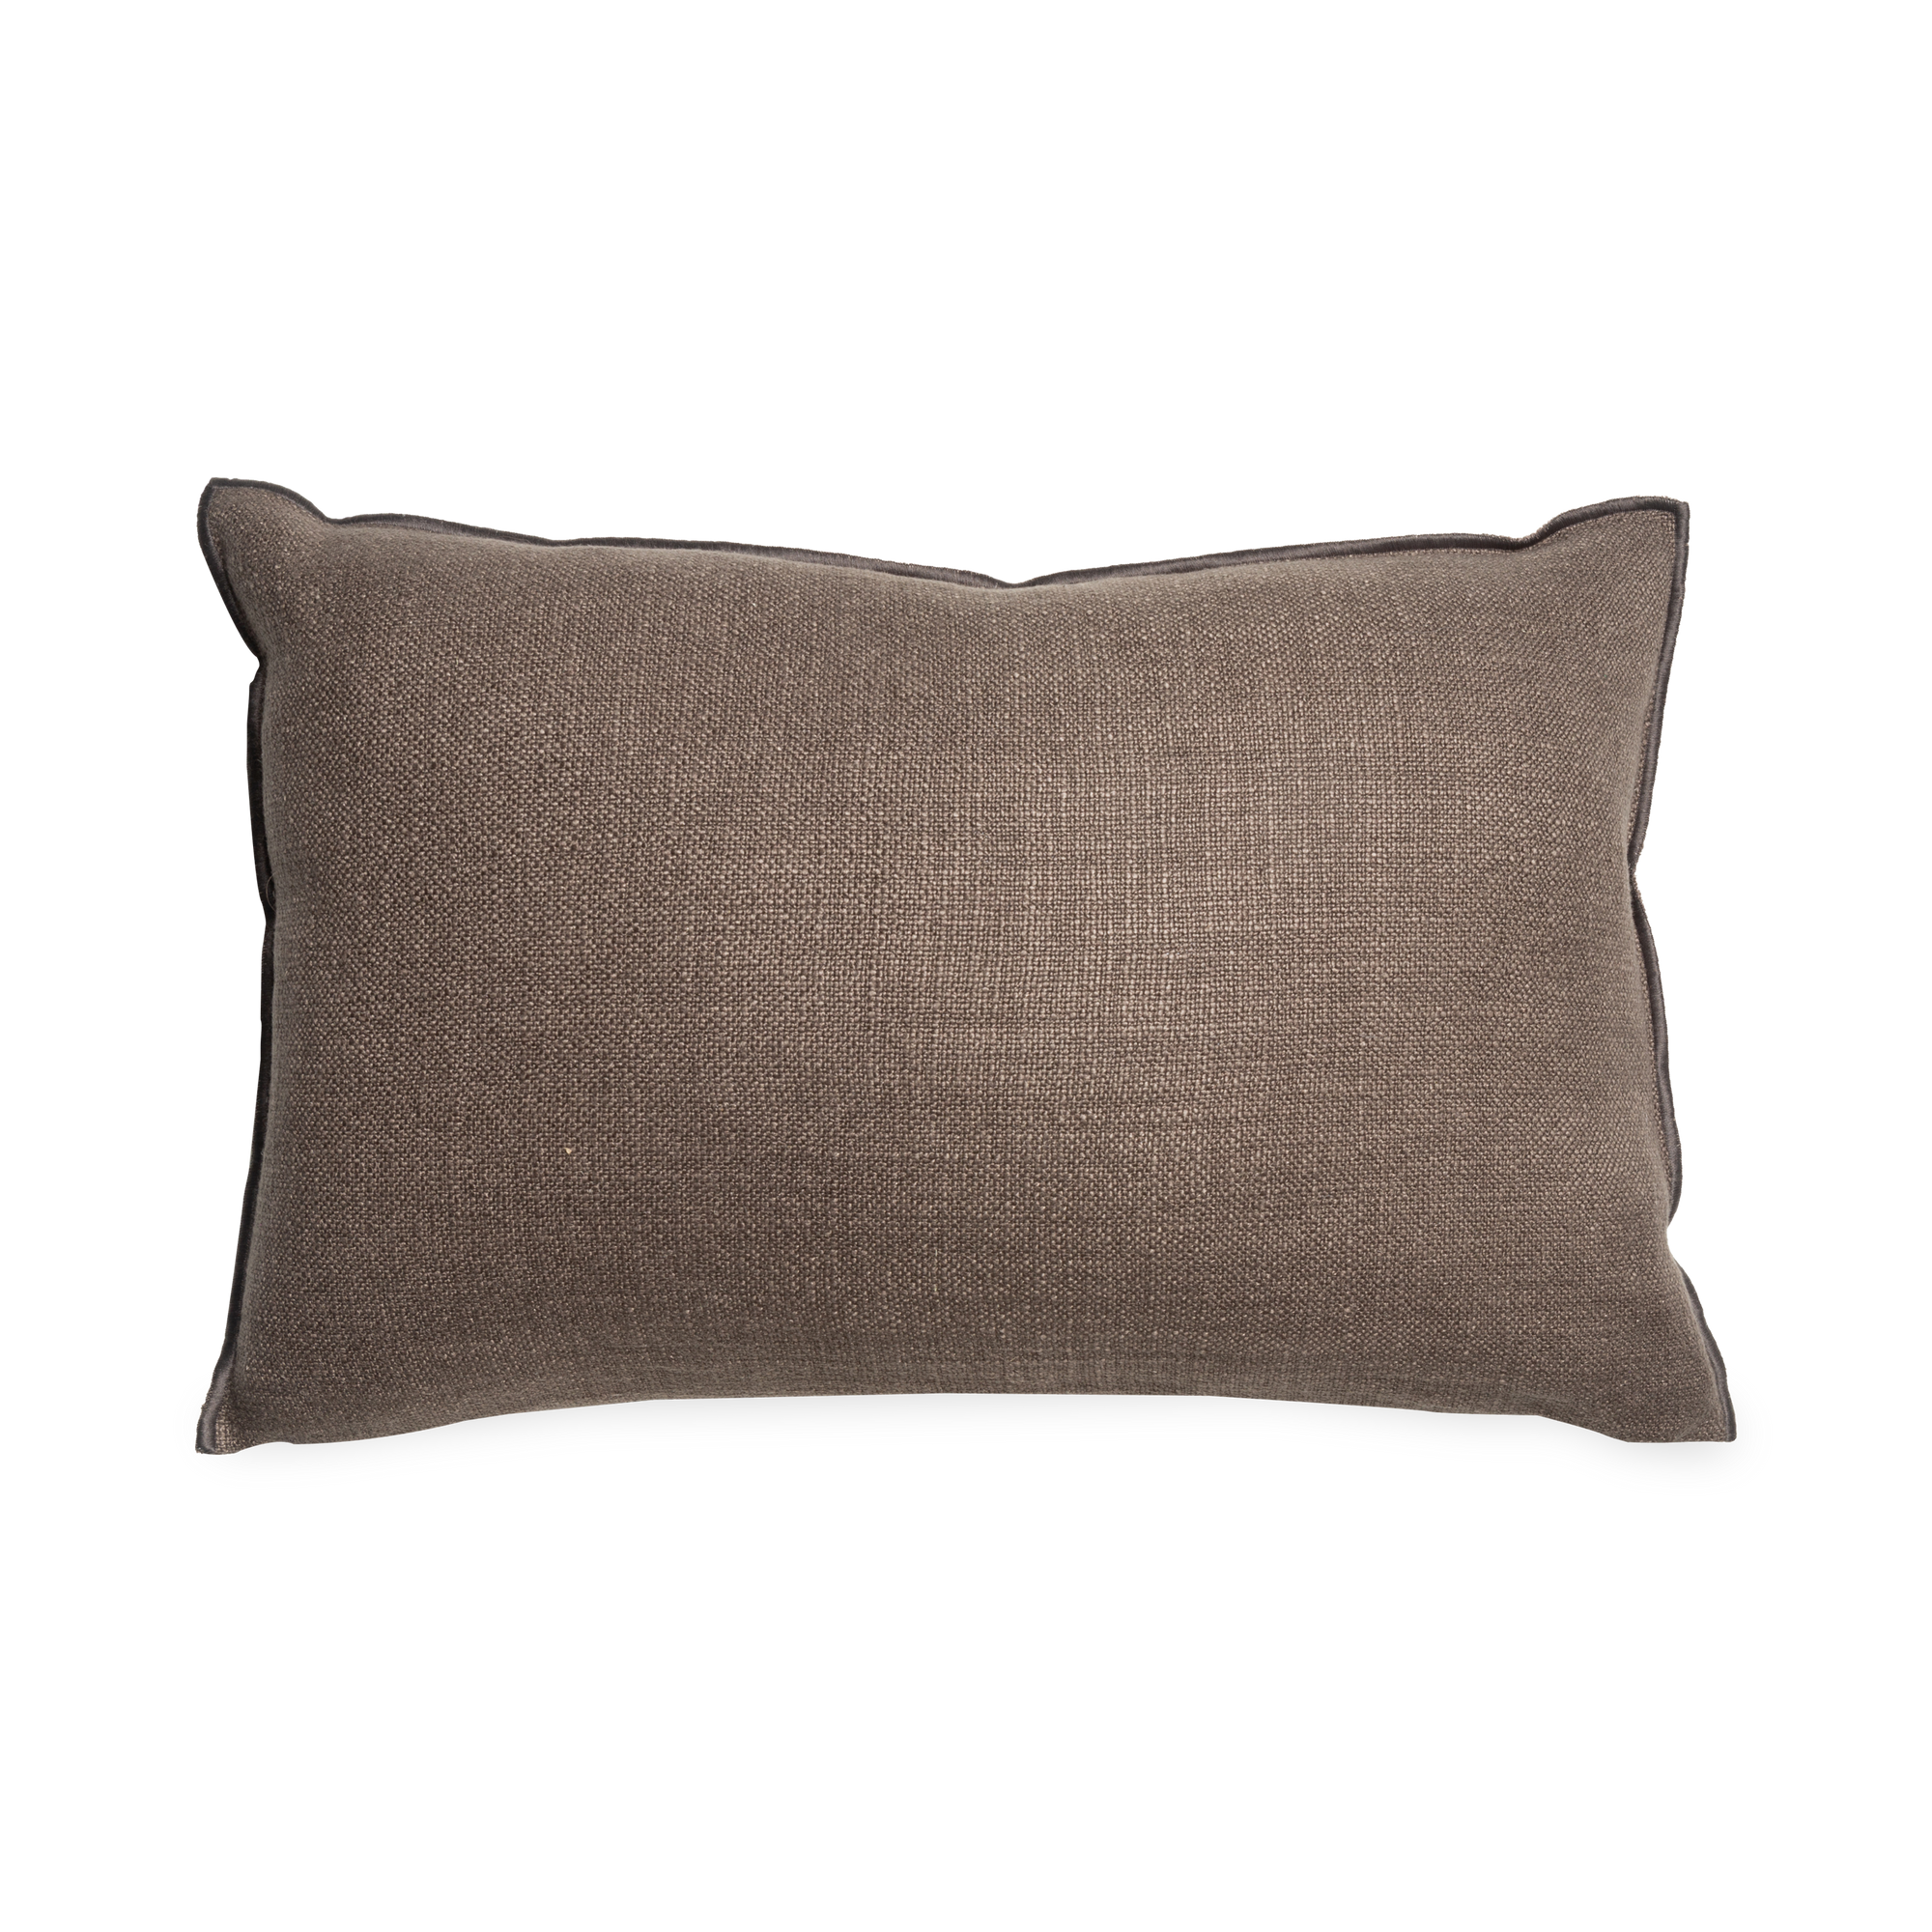 Texturally captivating, the Vintage Linen Pillow has a soft linen body that layers well with other accent pillows due to its simplicity.